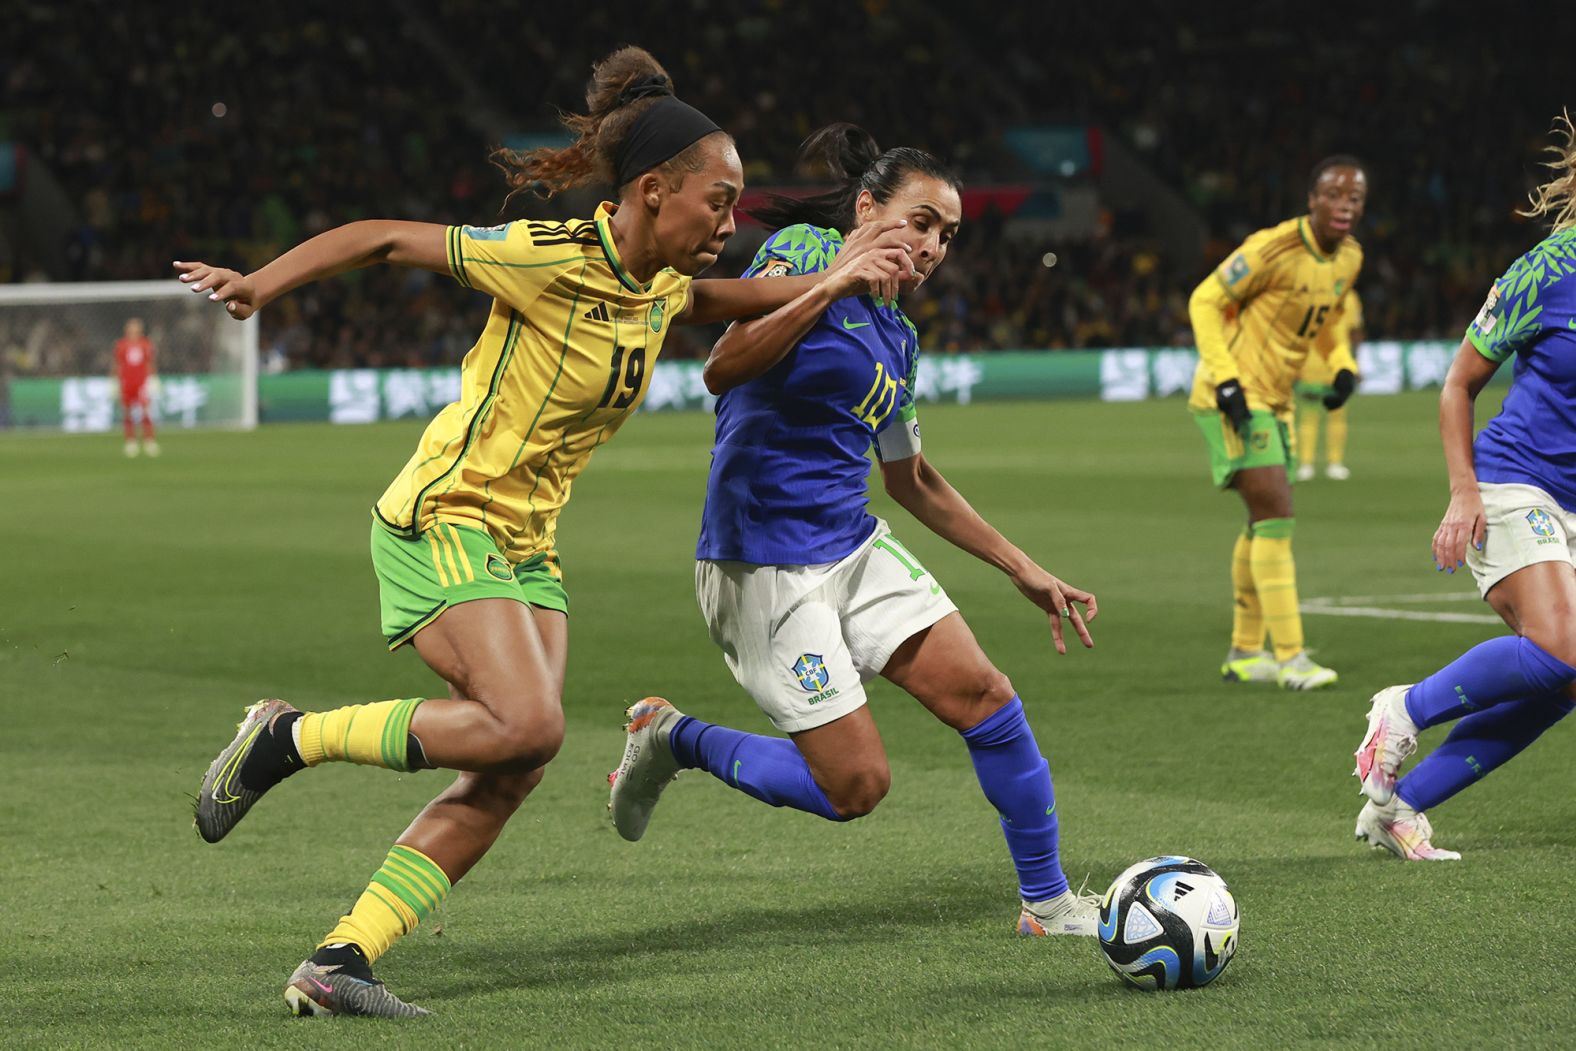 Brazil's Marta, right, competes against Jamaica's Tiernny Wiltshire on August 2. <a href="index.php?page=&url=https%3A%2F%2Fwww.cnn.com%2F2023%2F08%2F01%2Ffootball%2Fbrazil-jamaica-france-panama-womens-world-cup-spt-intl%2Findex.html" target="_blank">The two teams drew 0-0</a>, but it was Jamaica that advanced to the knockout stage of the tournament. This was the last World Cup for Marta, the tournament's record scorer and veteran of six tournaments.